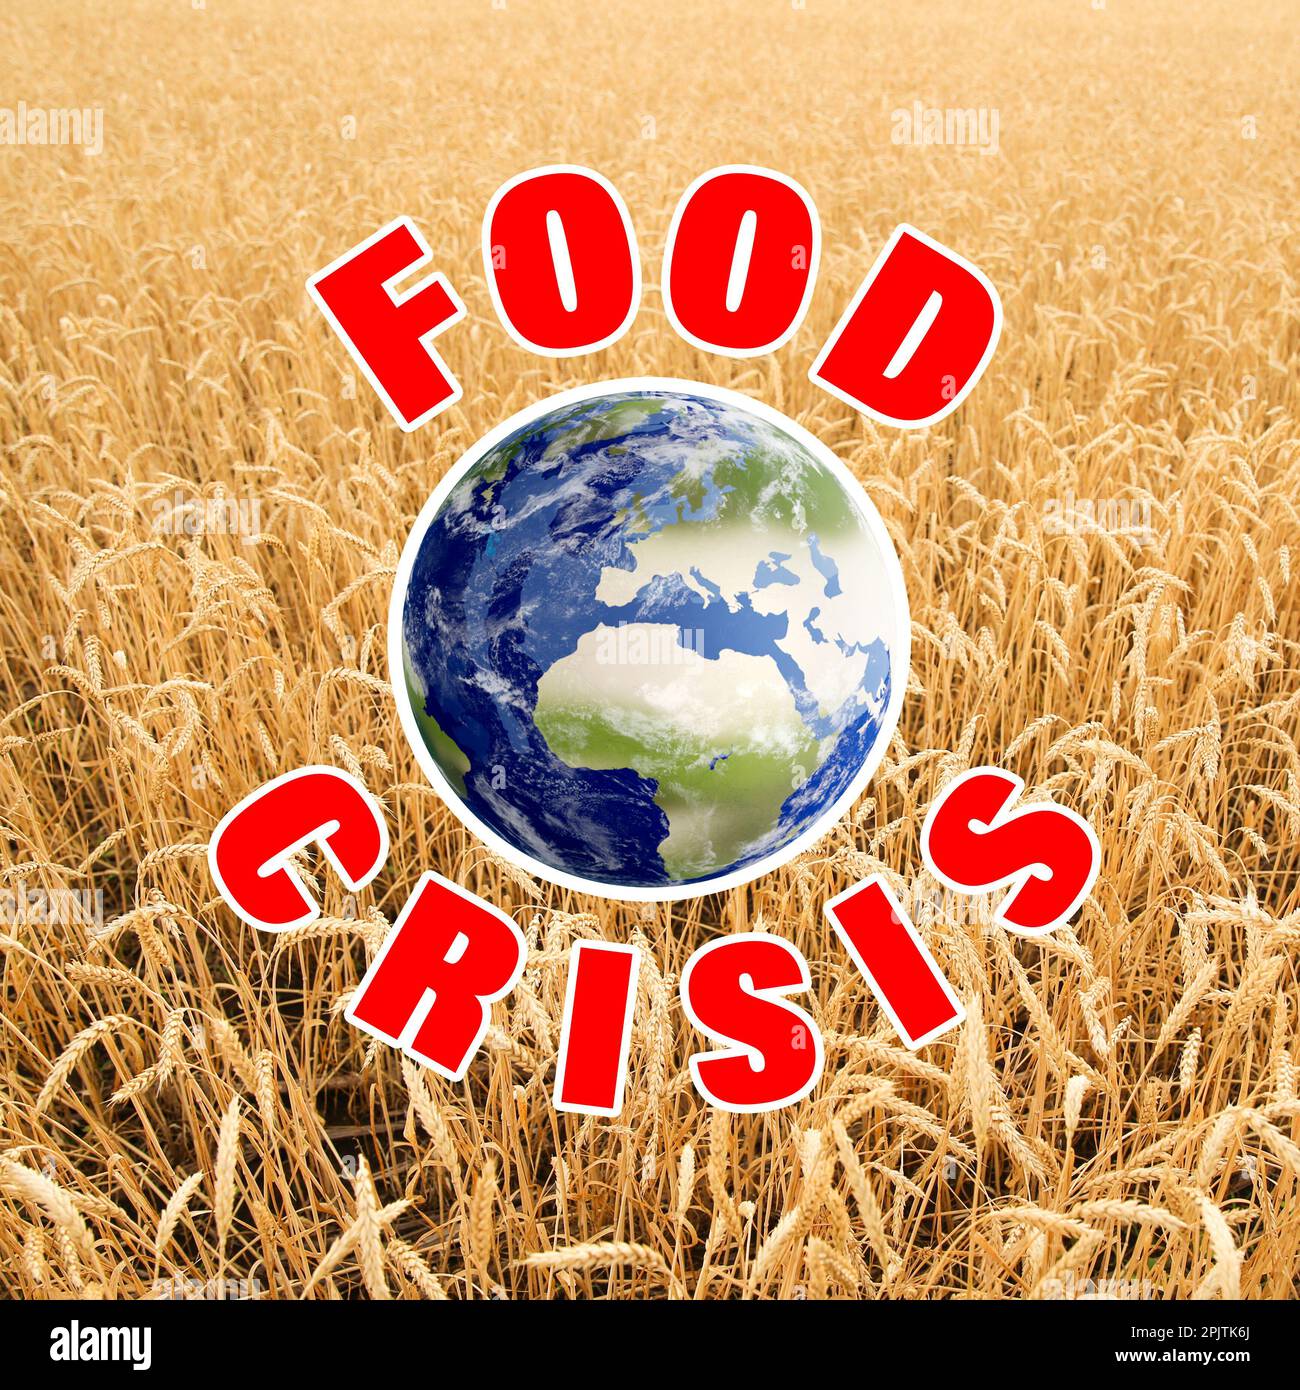 Global food crisis concept. Wheat field and illustration of Earth Stock Photo